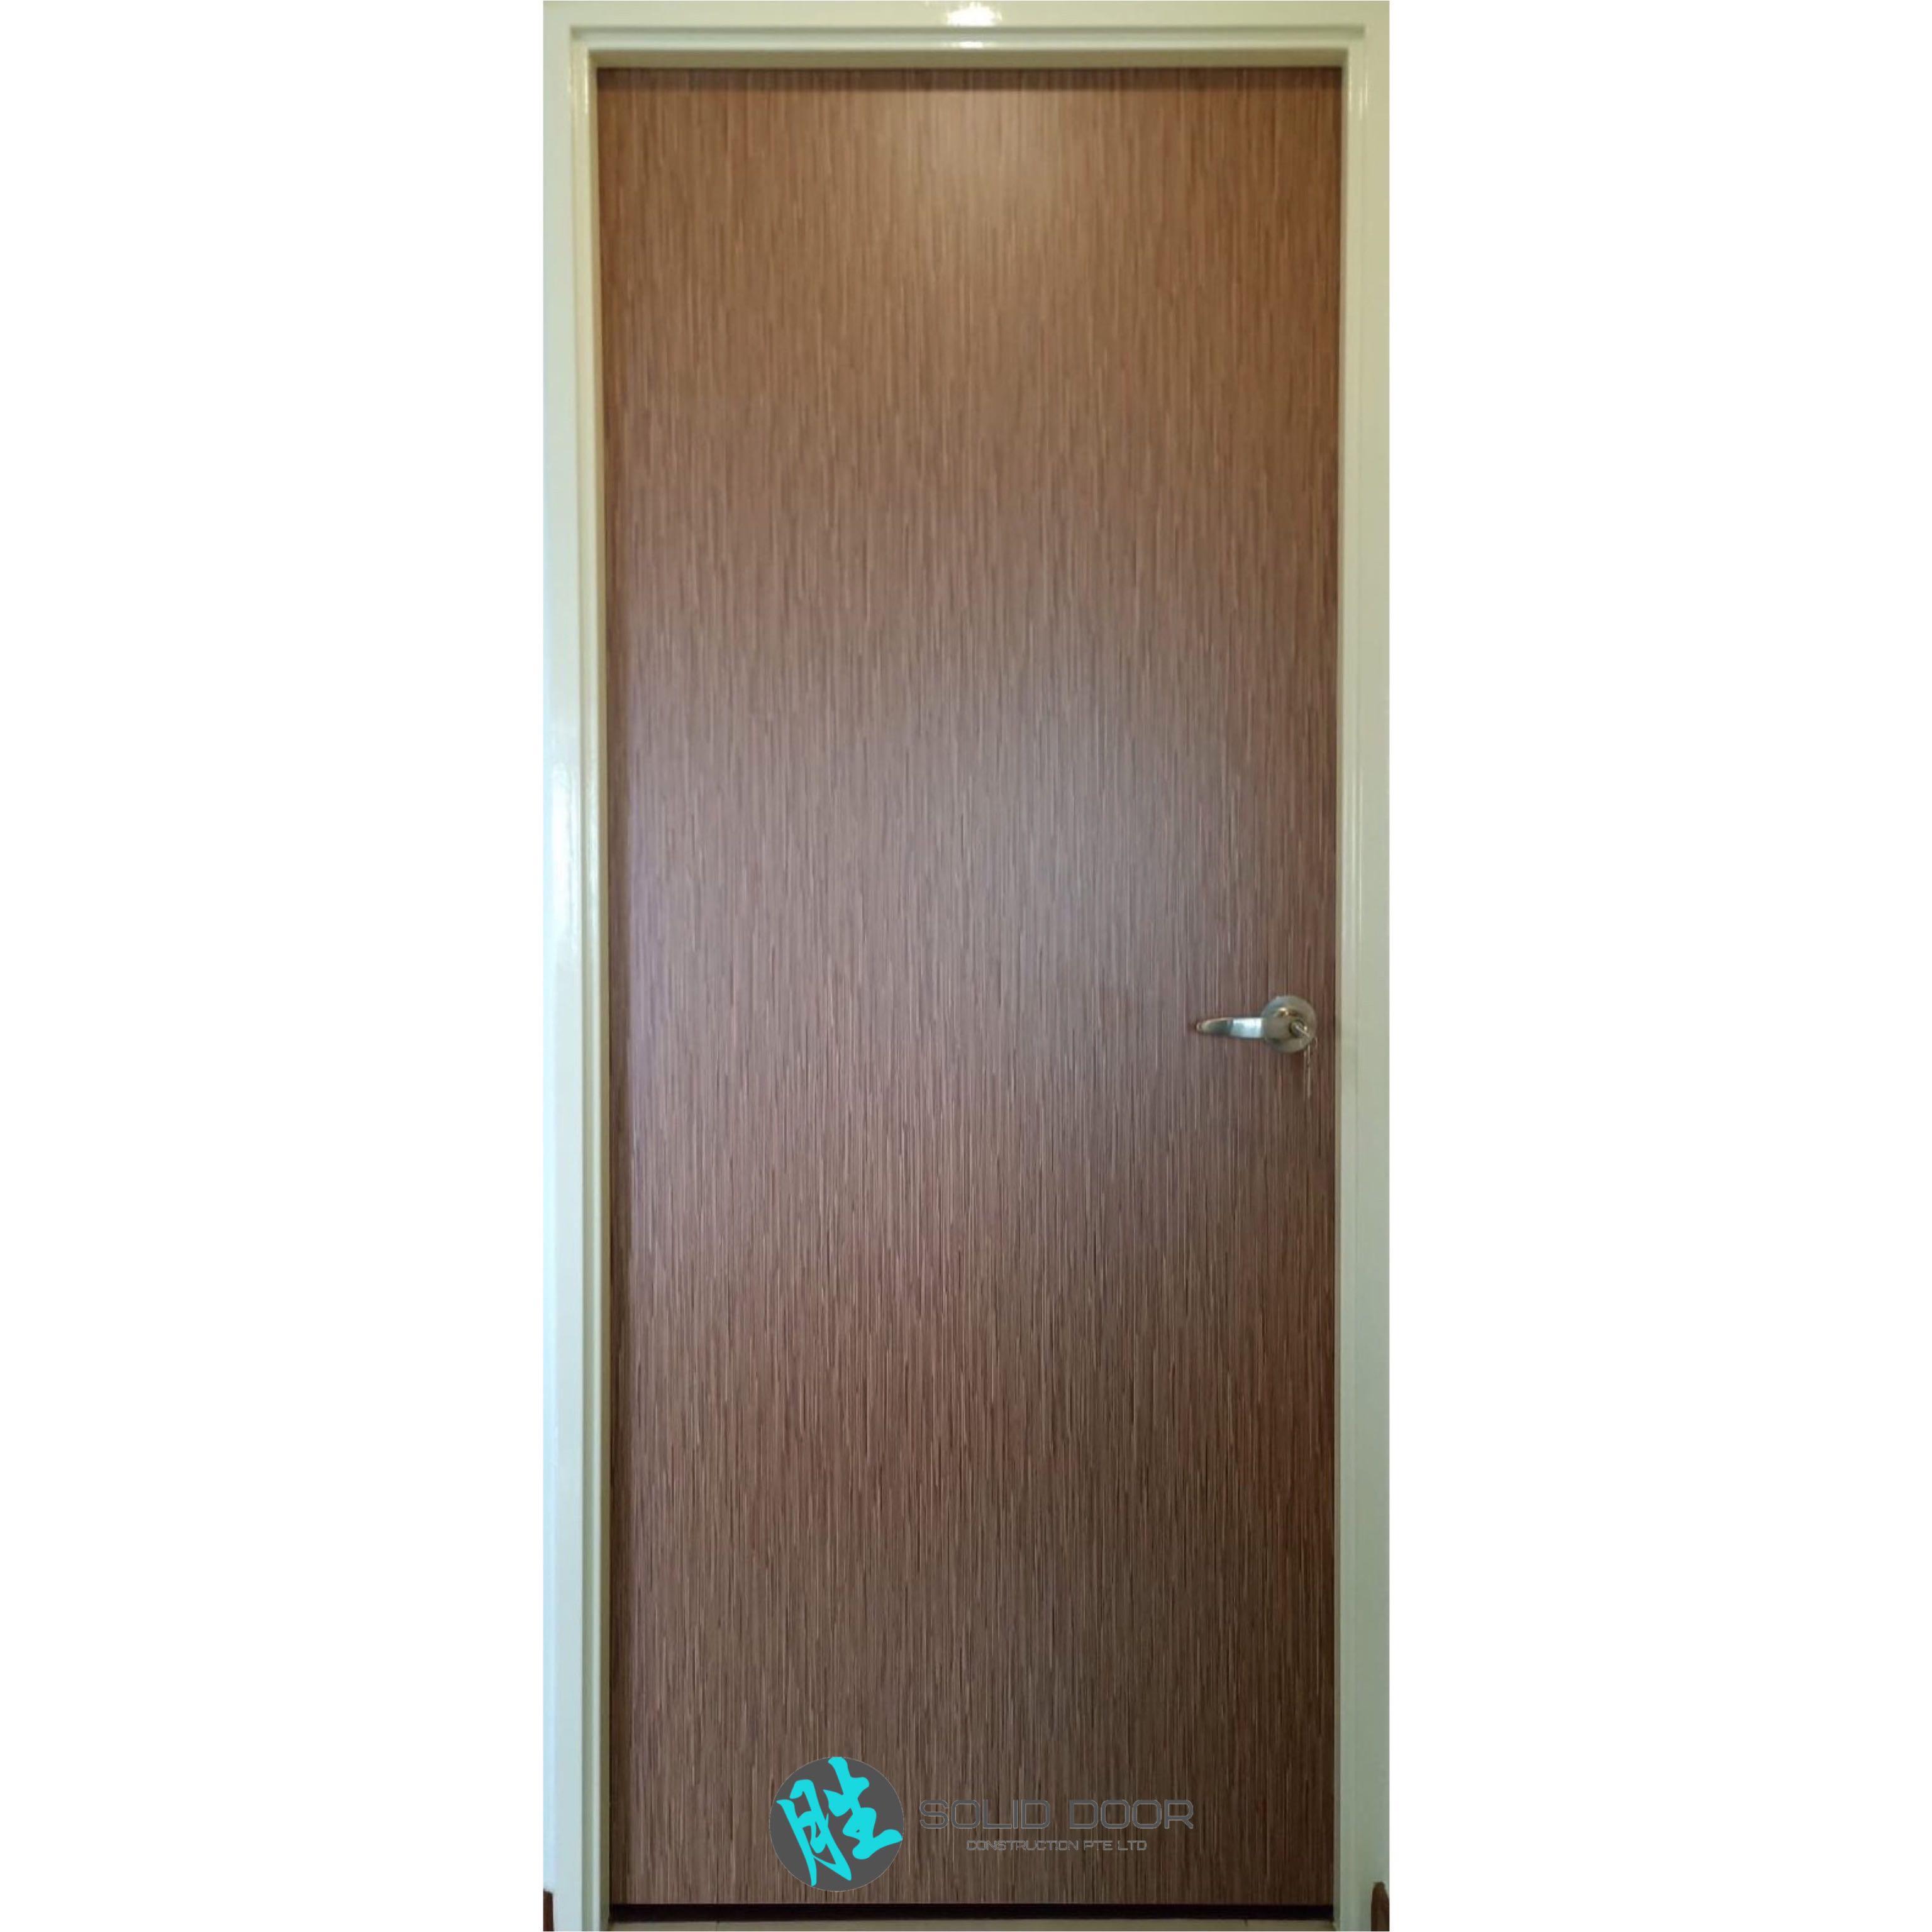 Laminate Bedroom Door for HDB/BTO/LANDED/CONDO, Home Services, Renovations  on Carousell